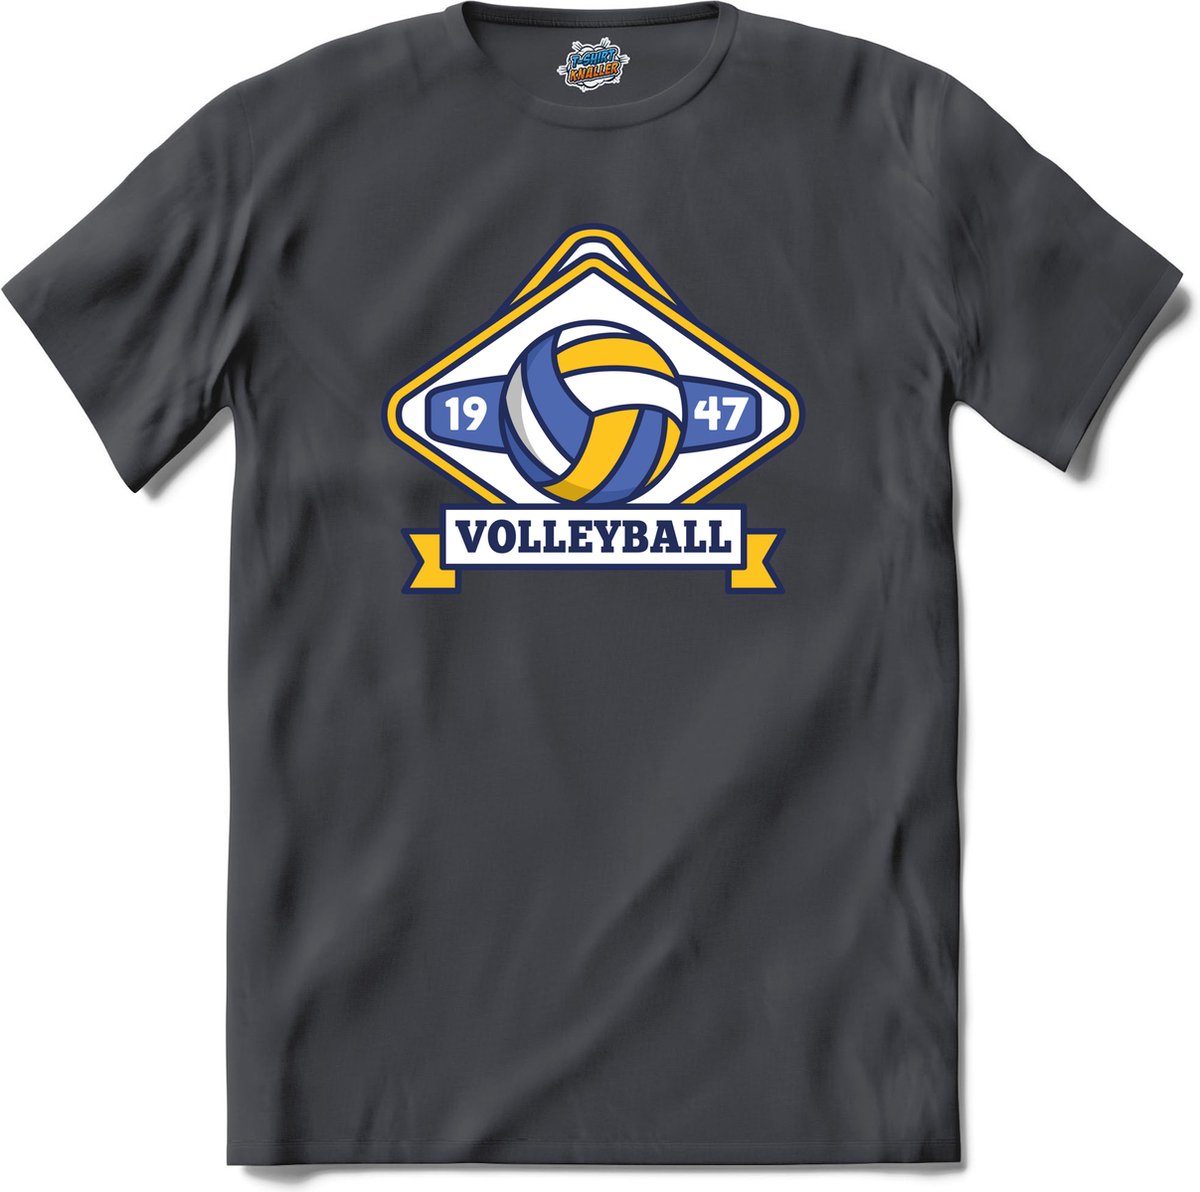 Volleybal sport - T-Shirt - Dames - Mouse Grey - Maat S